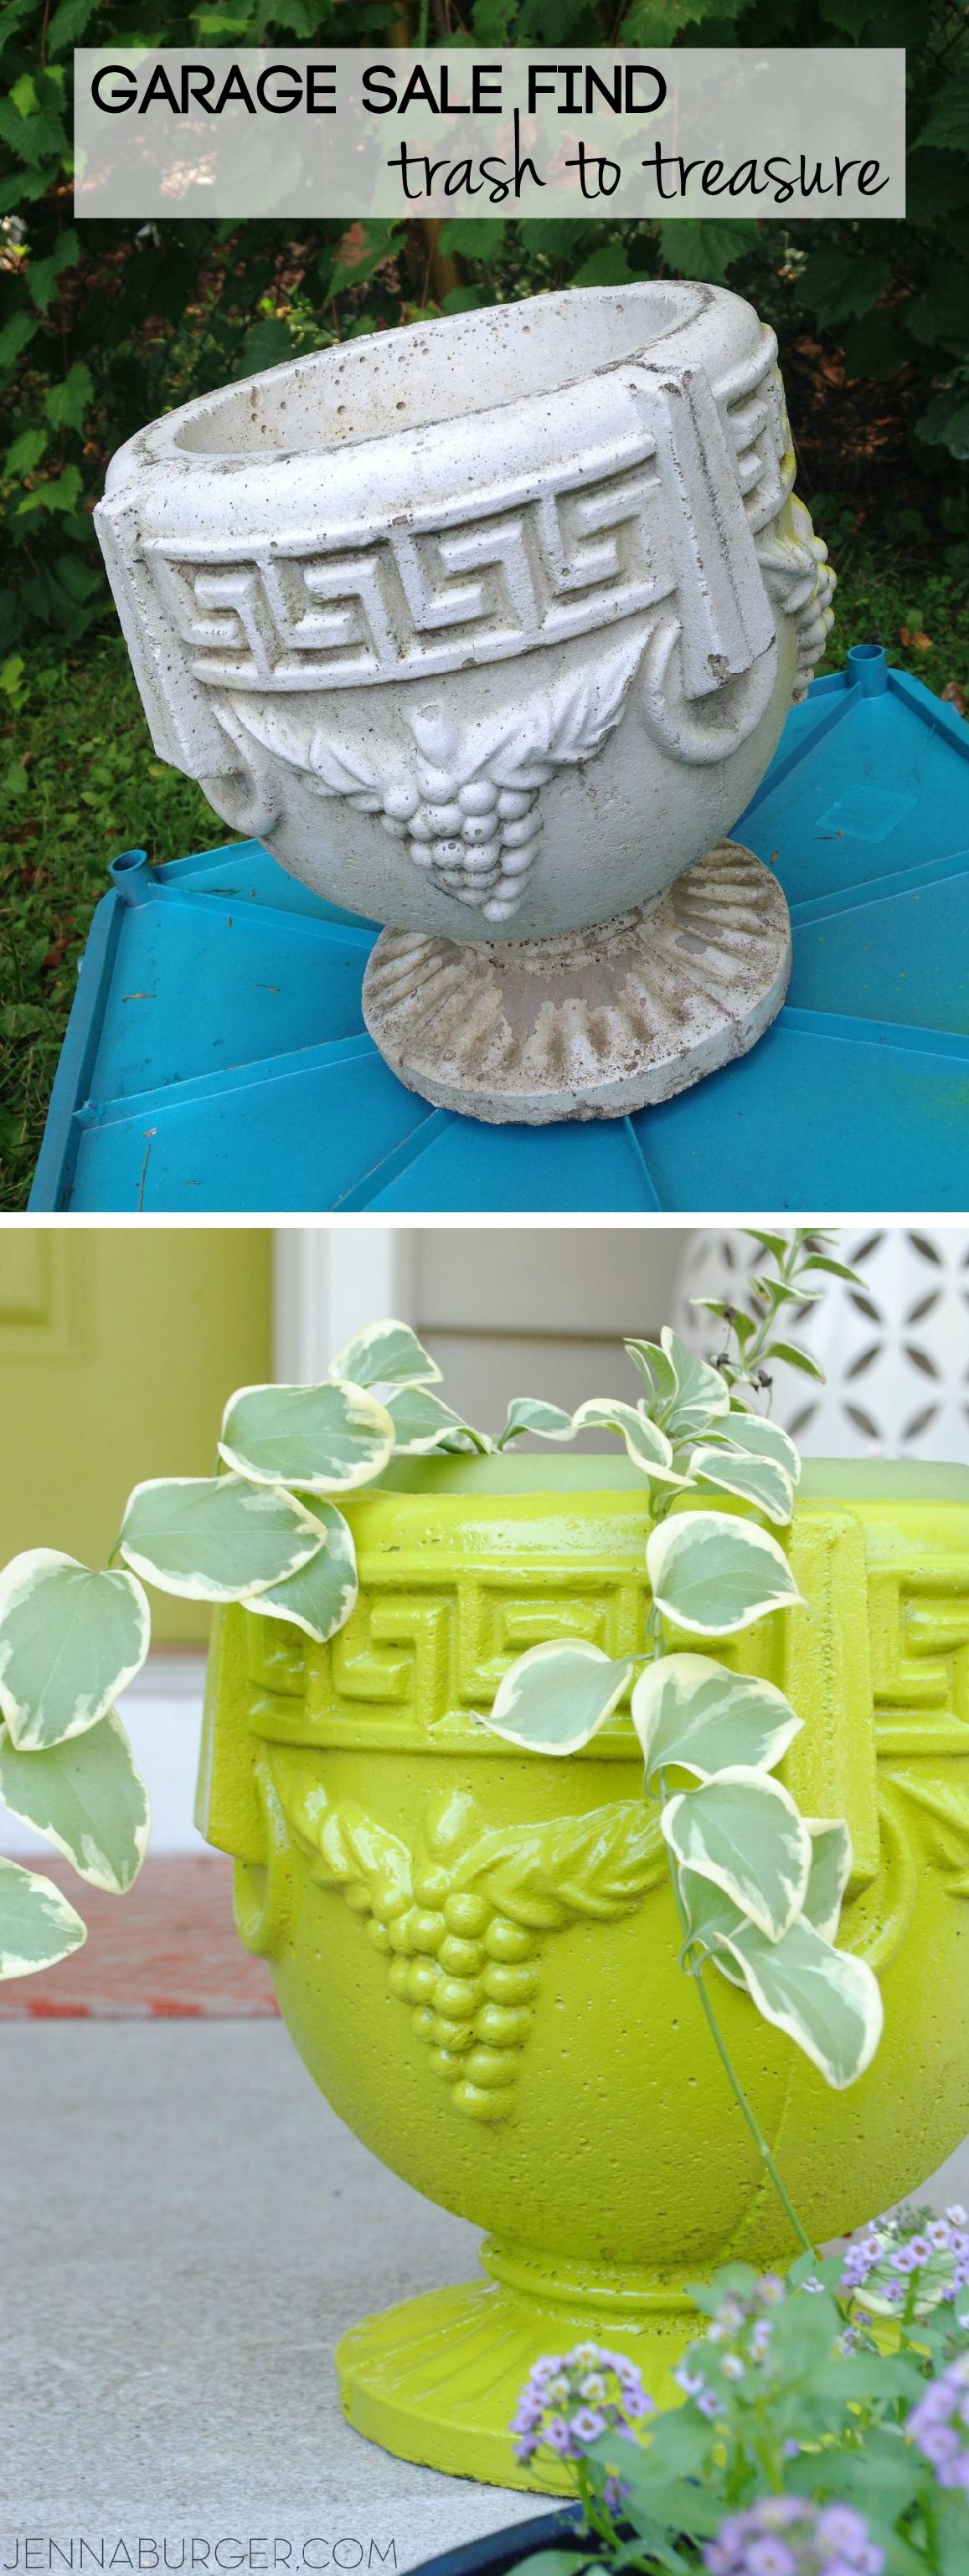 Before and After planter - $1 garage sale find transformed with Green Citrus spray paint